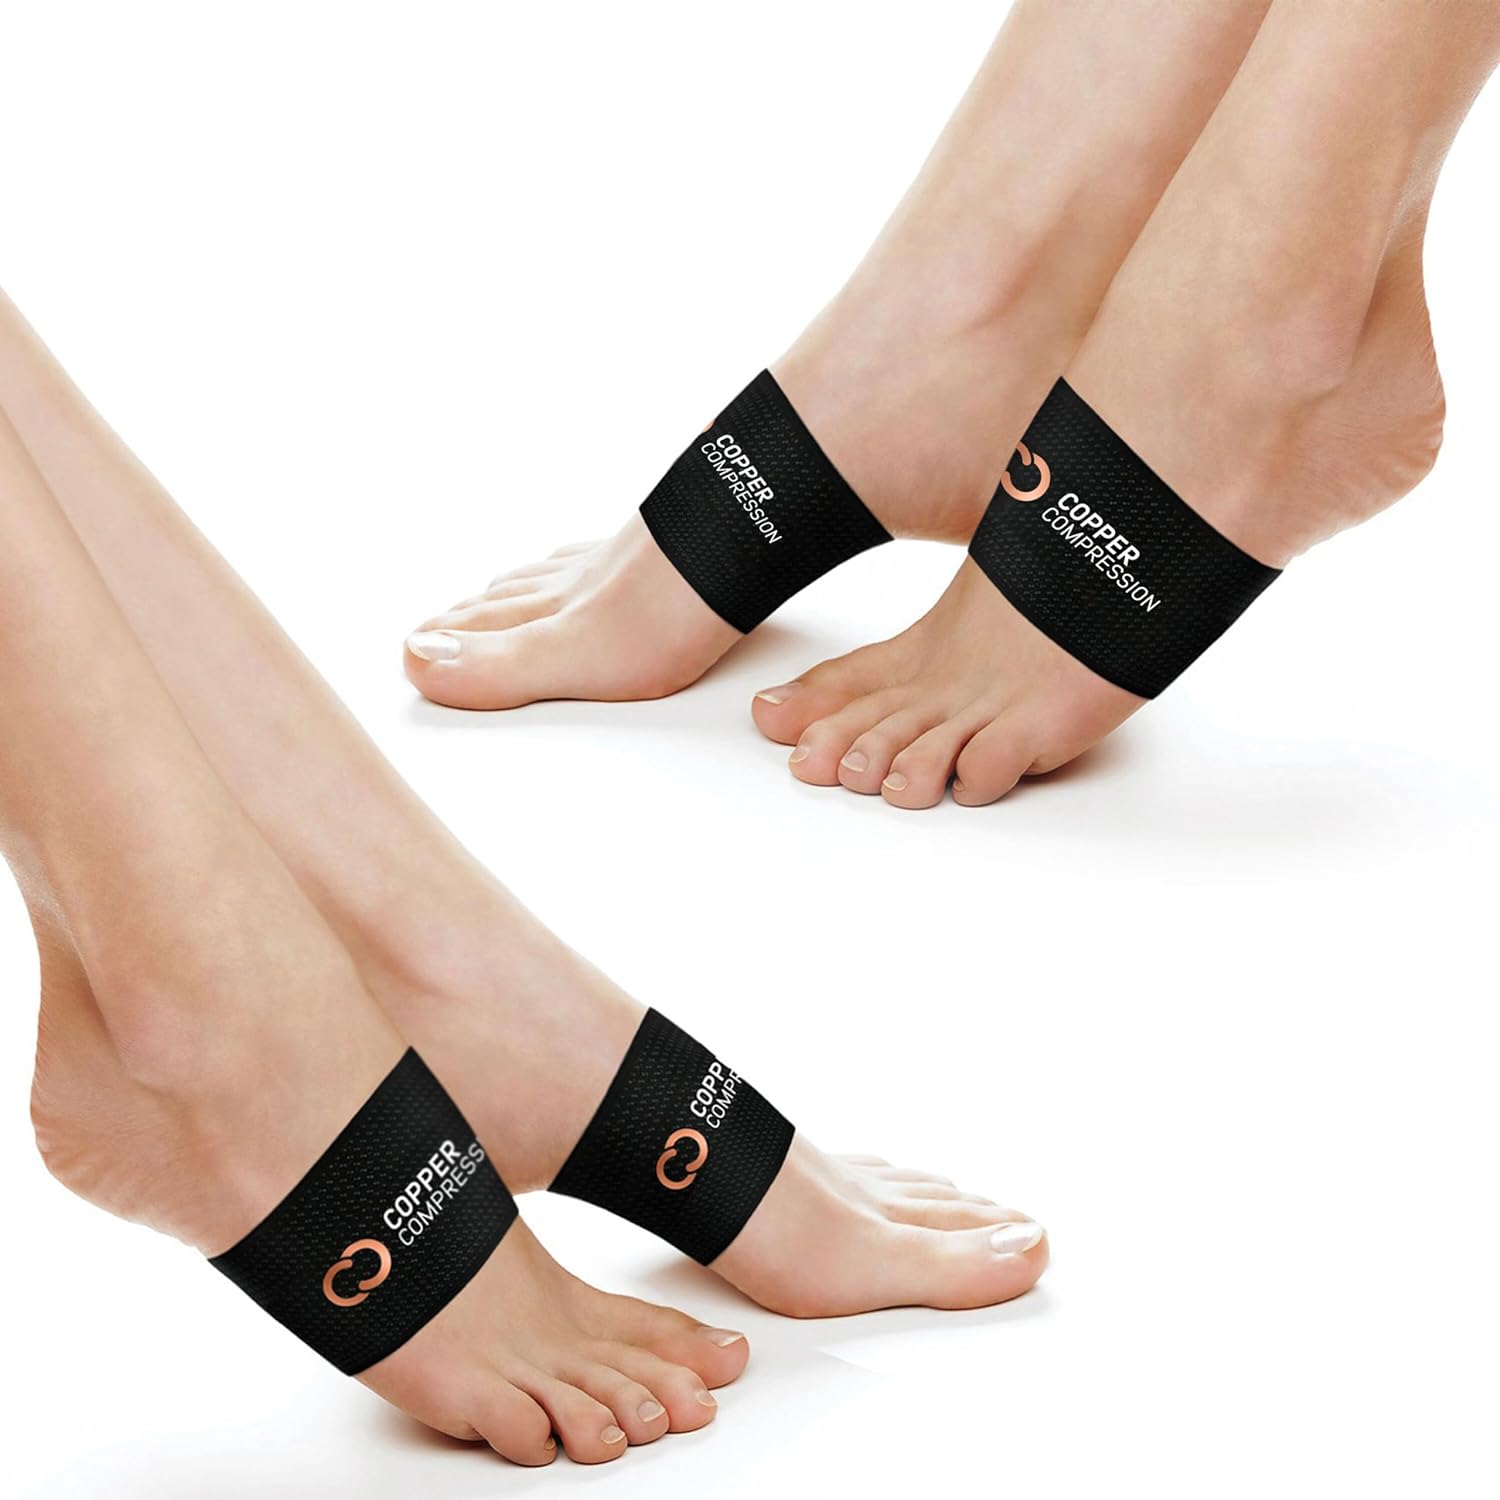 Featured Image for Copper Compression Arch Support – 4 Plantar Fasciitis Braces/Sleeves. Foot Care, Heel Spurs, Feet Pain Relief, Flat & Fallen Arches, High Arch